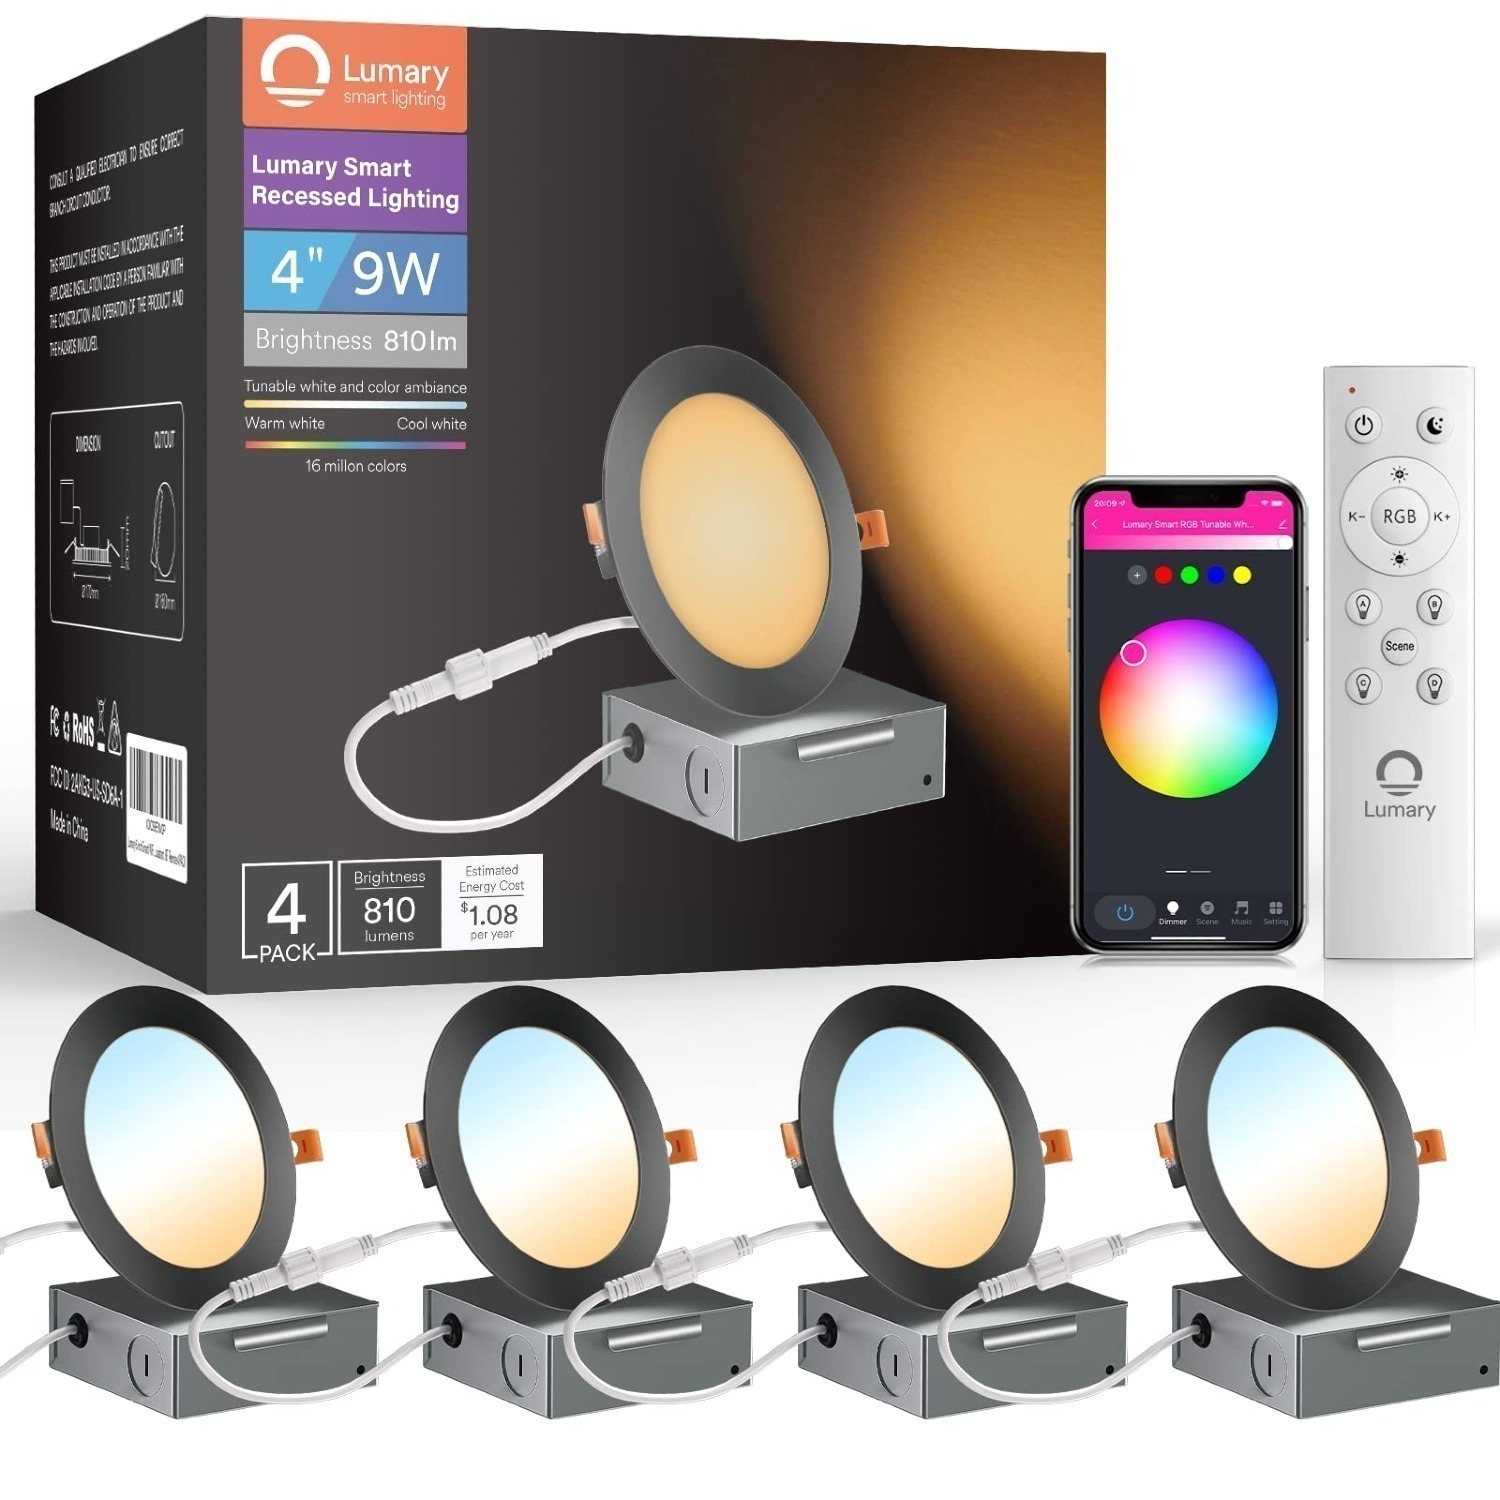 4-Pack 4" Lumary WiFi Smart Ultra-Thin Recessed Lighting (Black) w/ Remote Controller $71.50 & More + Free Shipping